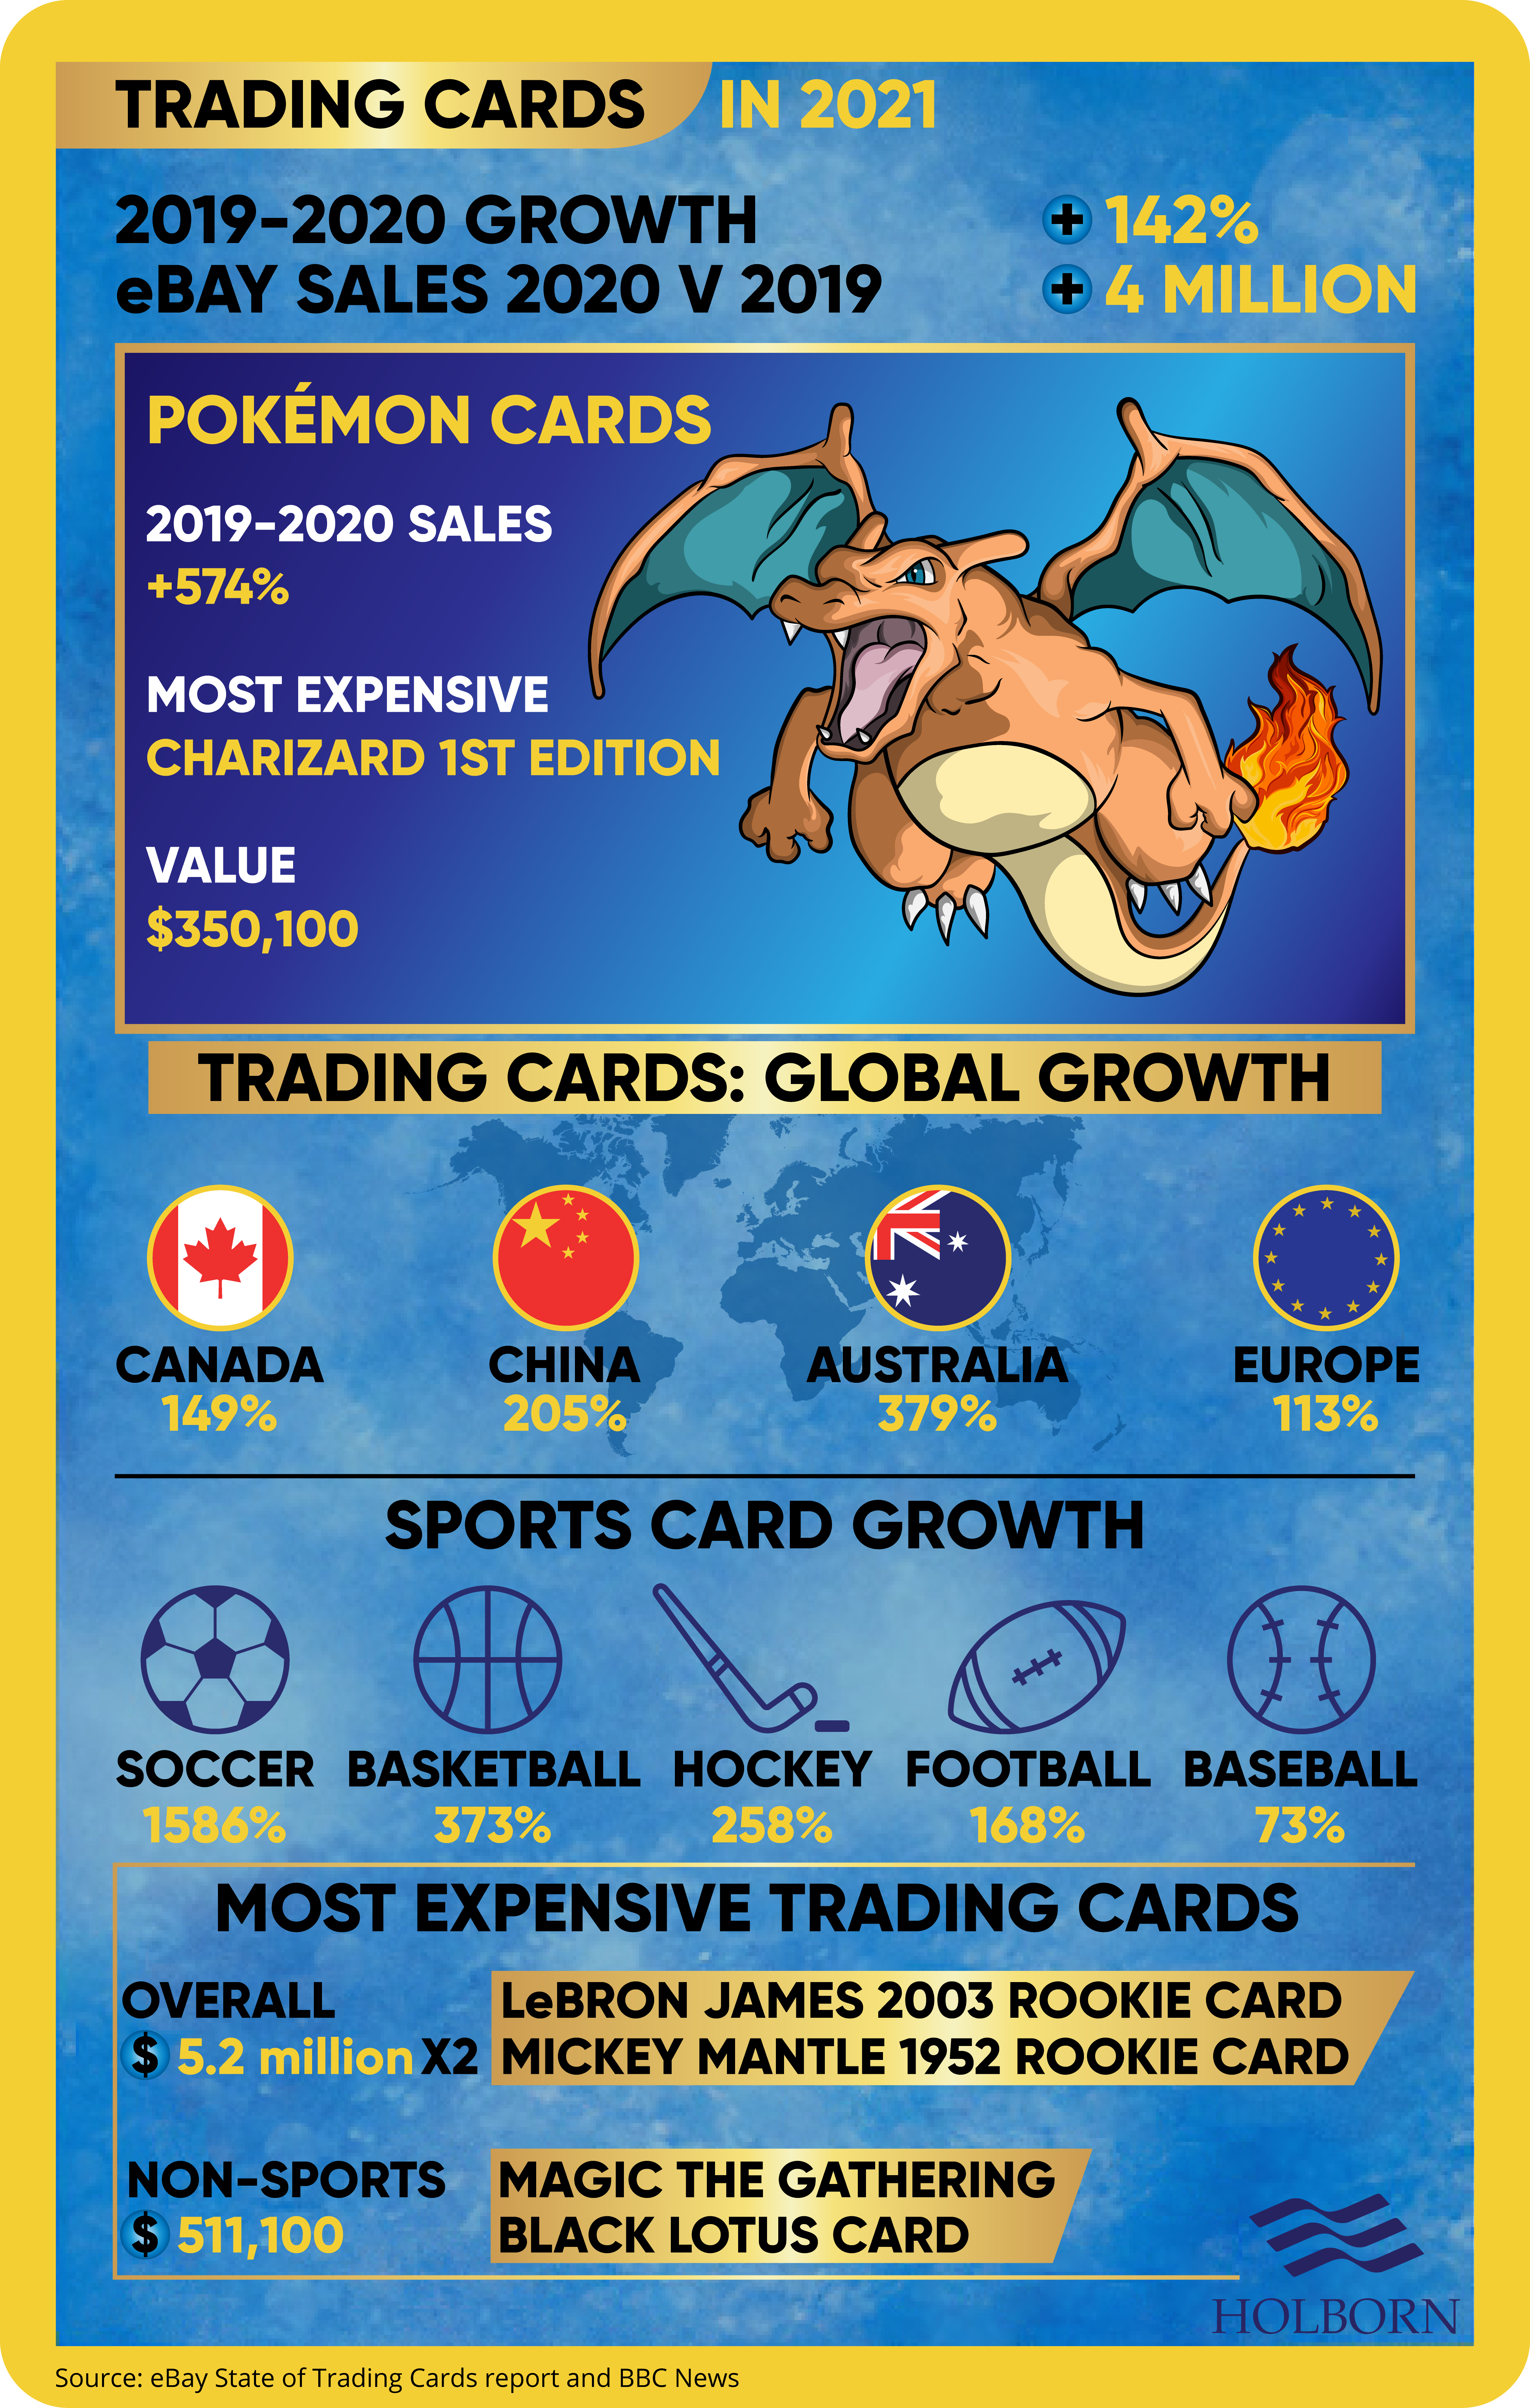 Trading card investments in 2021